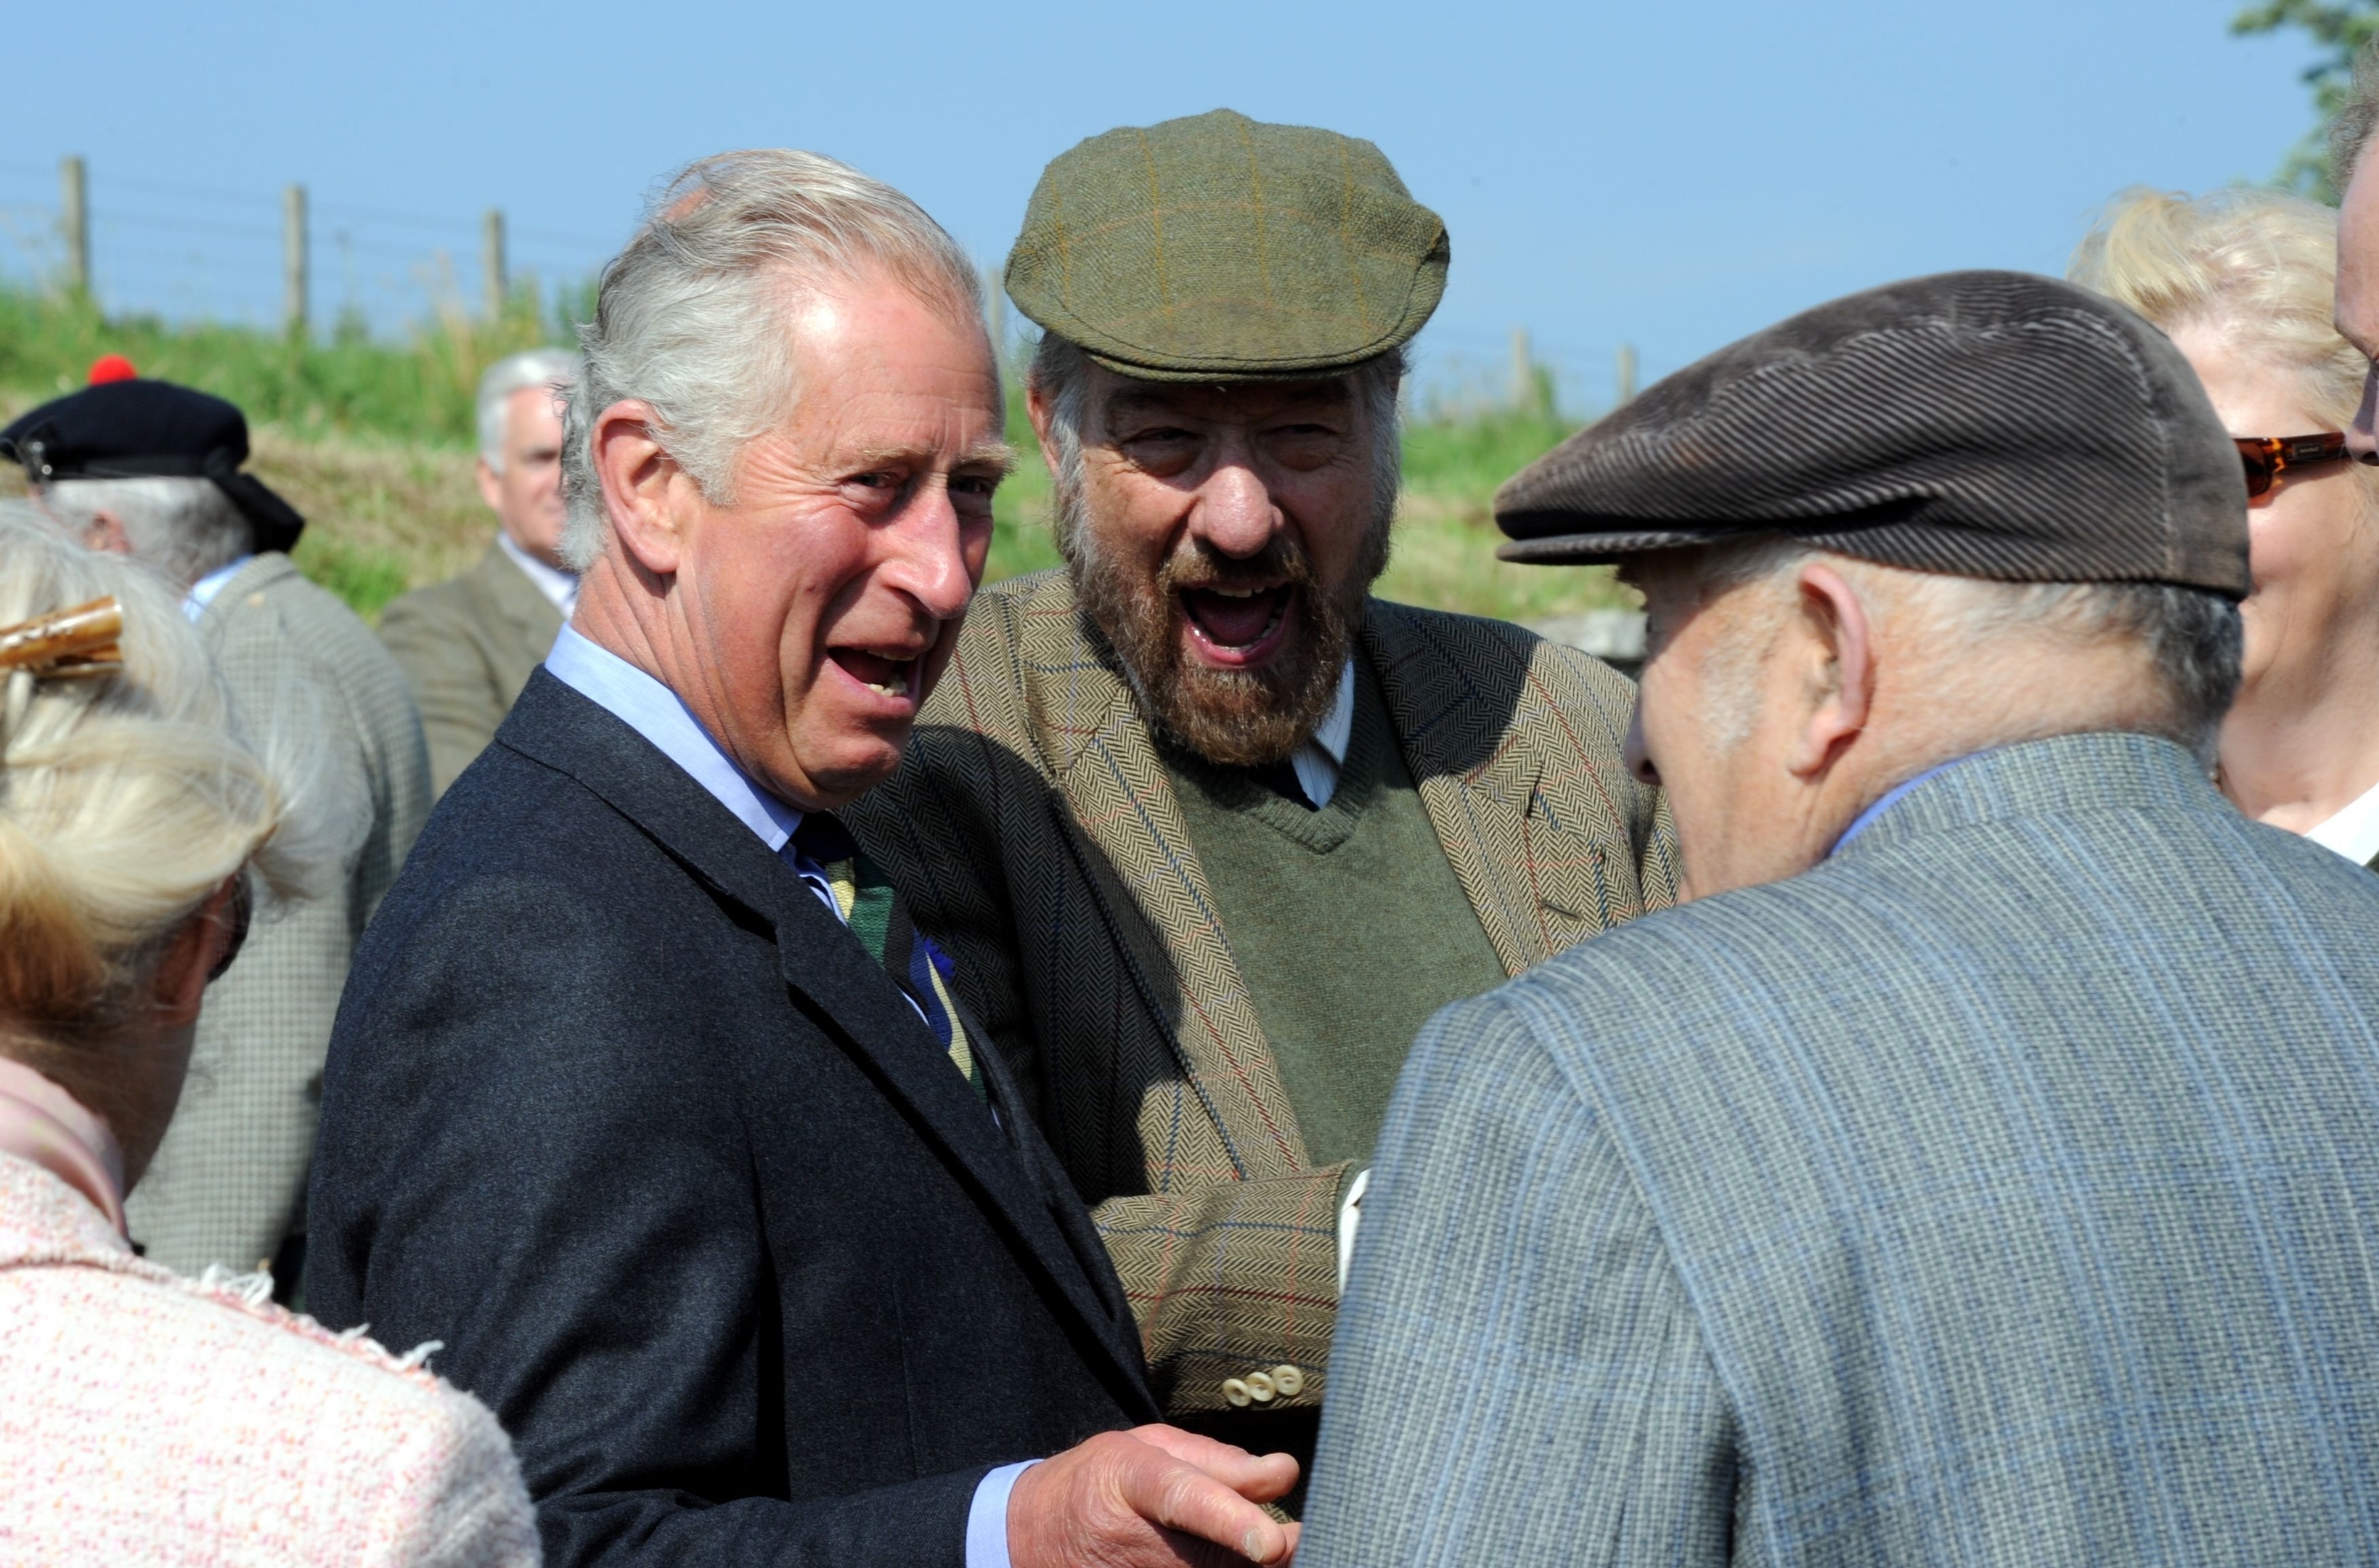 The Prince of Wales (left) during a visit to Cabrach Cairn